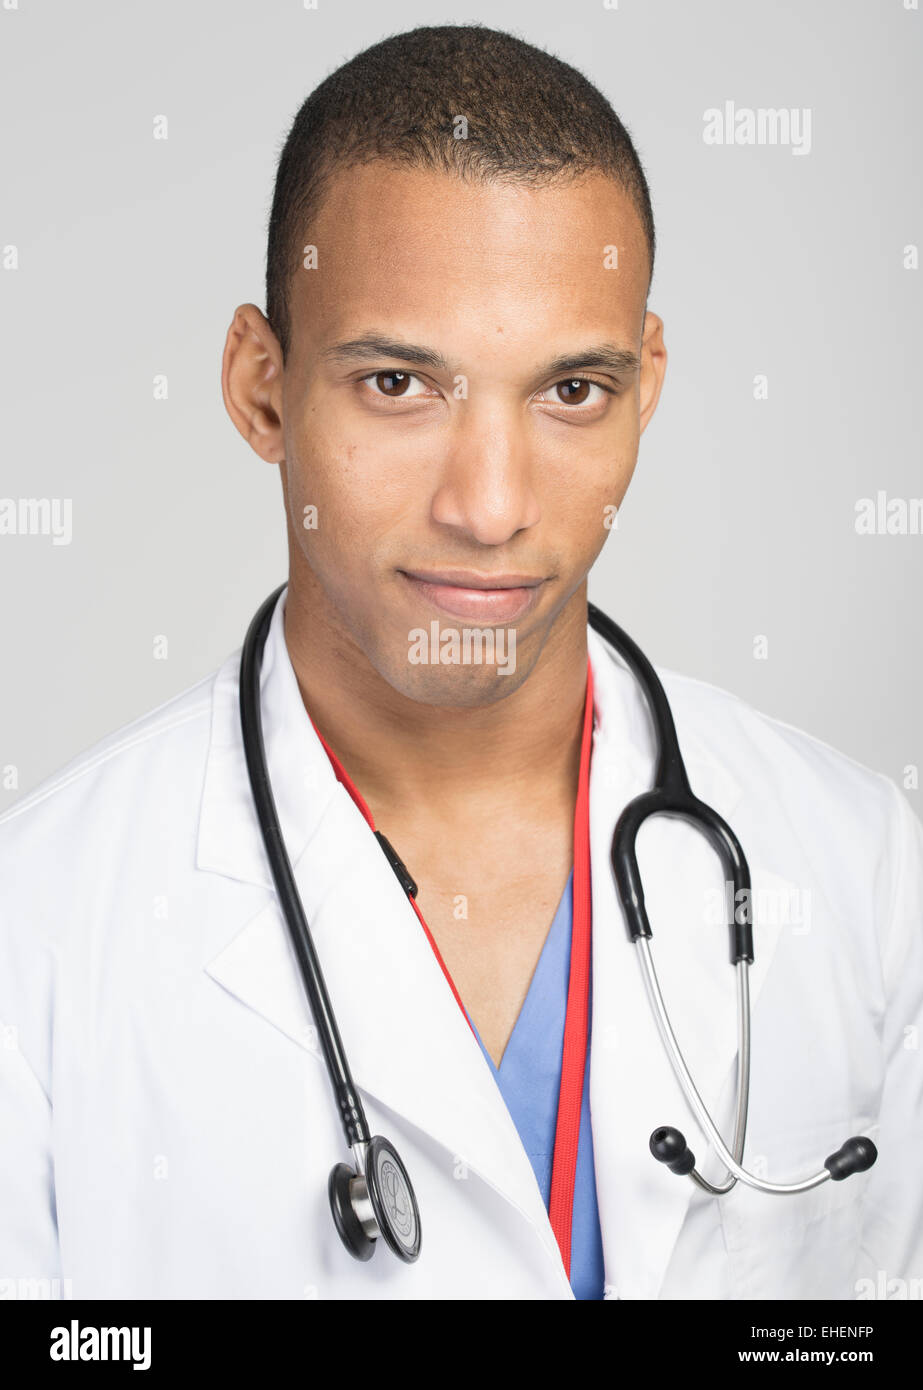 Young doctor / medical student Stock Photo